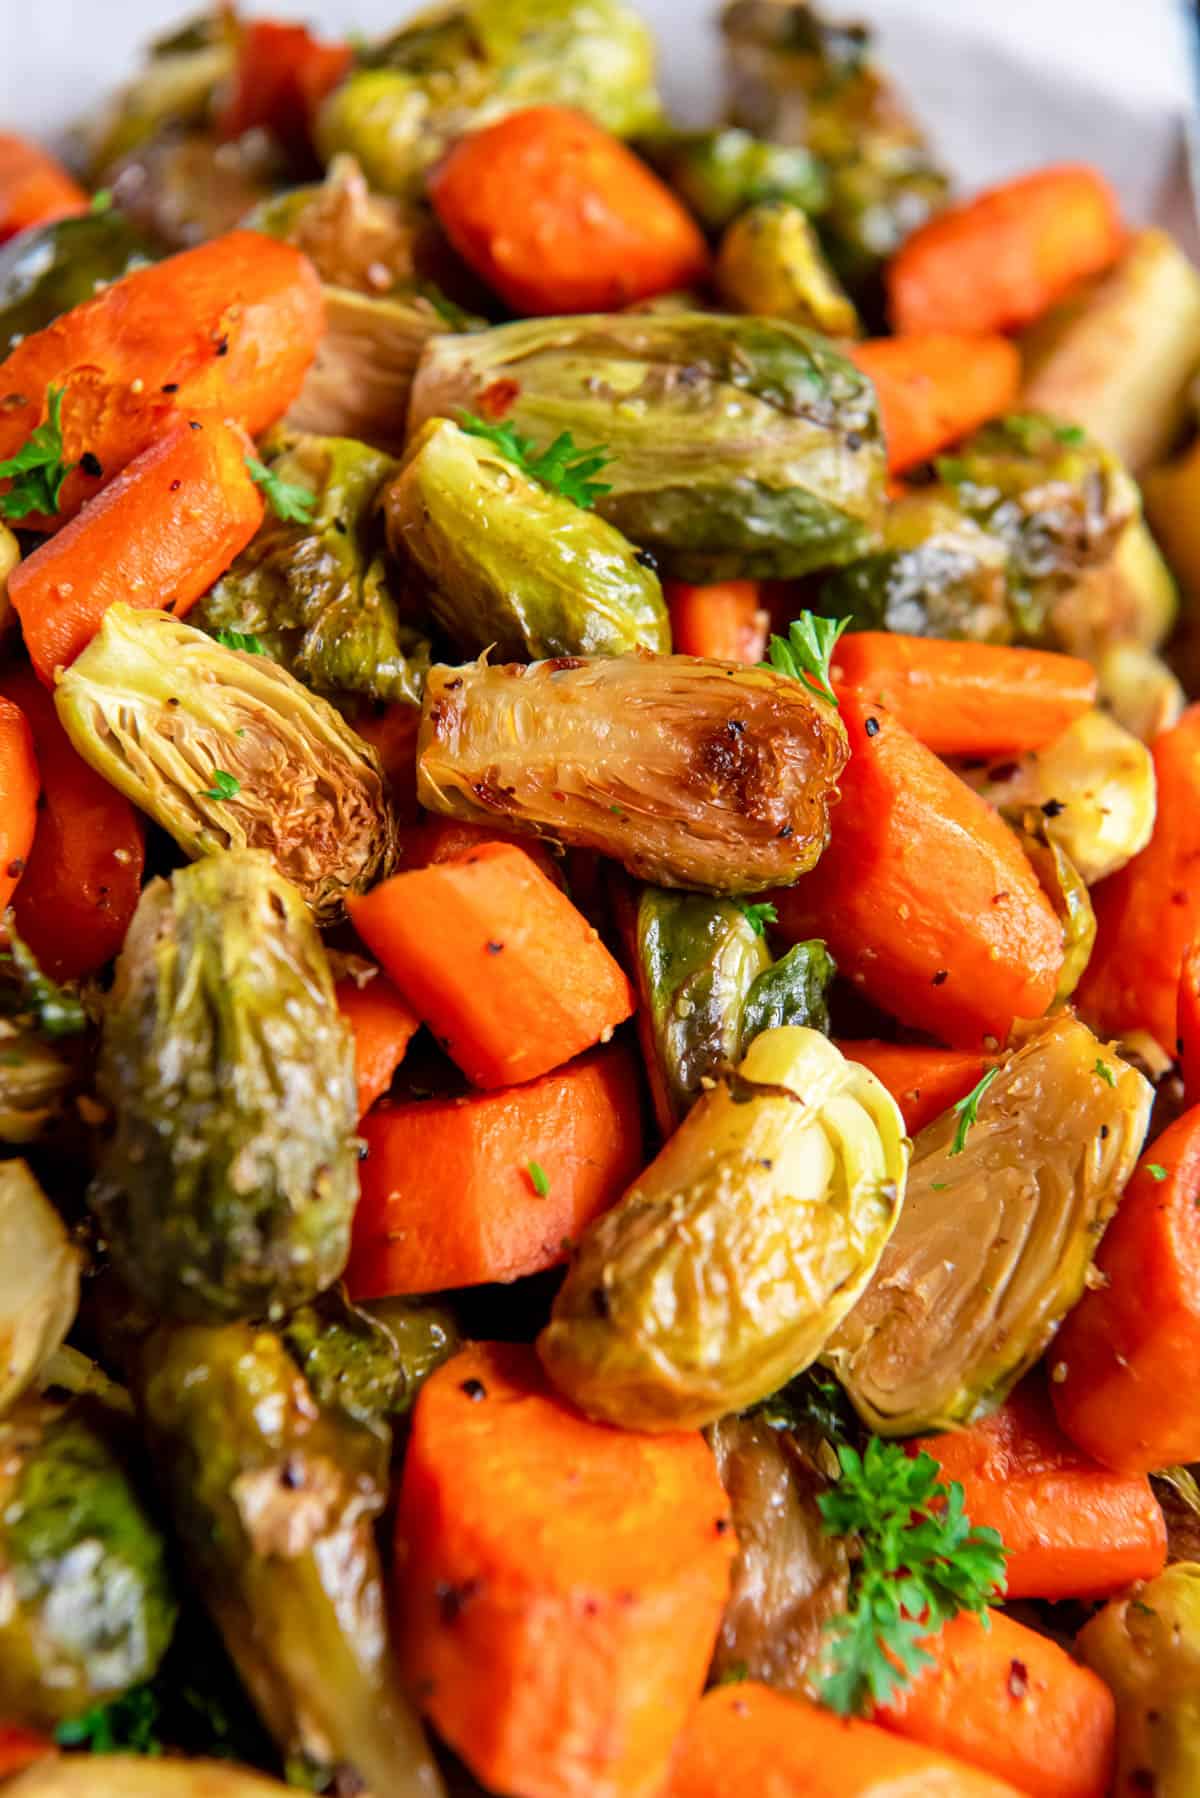 A close up photo of the roasted brussels sprouts and carrots in a bowl garnished with fresh parsley.